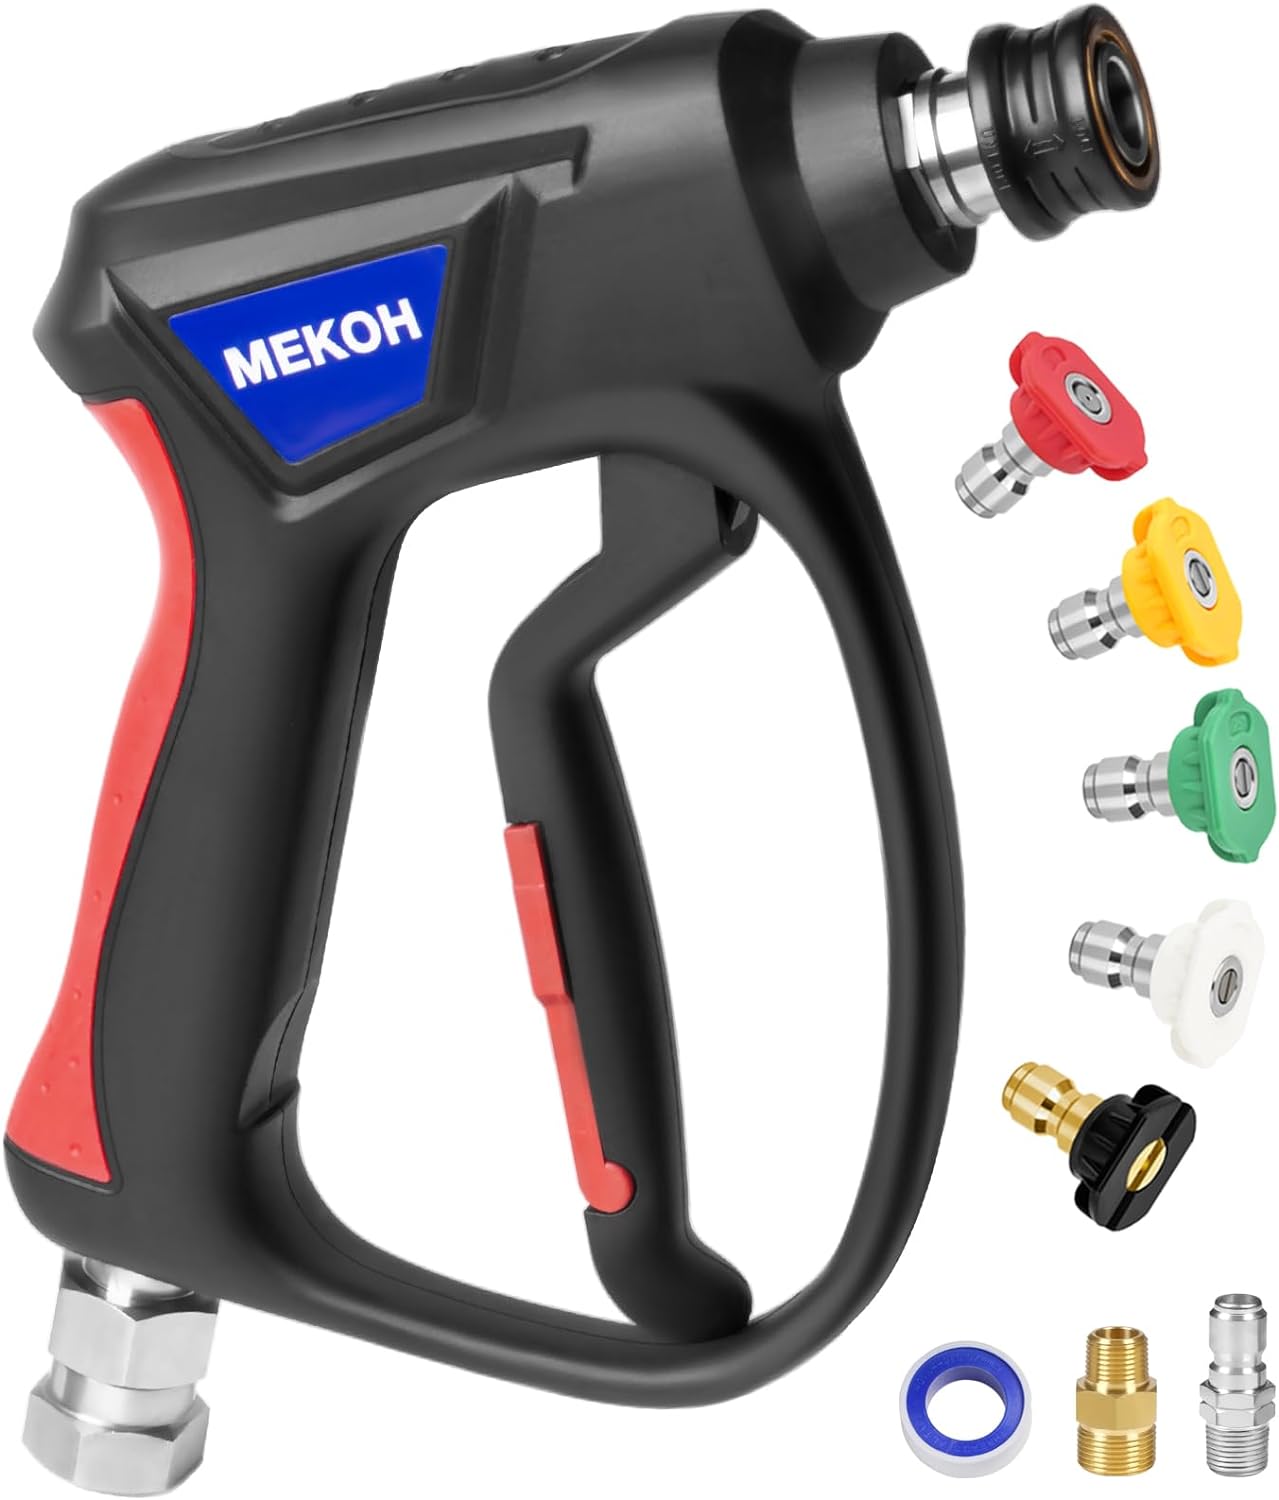 Short Pressure Washer Gun with Swivel, 5000 PSI High Power Washer Spray Gun, 10 GPM Foam Gun with 3/8 Quick Connect, M22-14mm for Extension Wand, Hose, Pressure Washer Handle with 5 Nozzle Tips